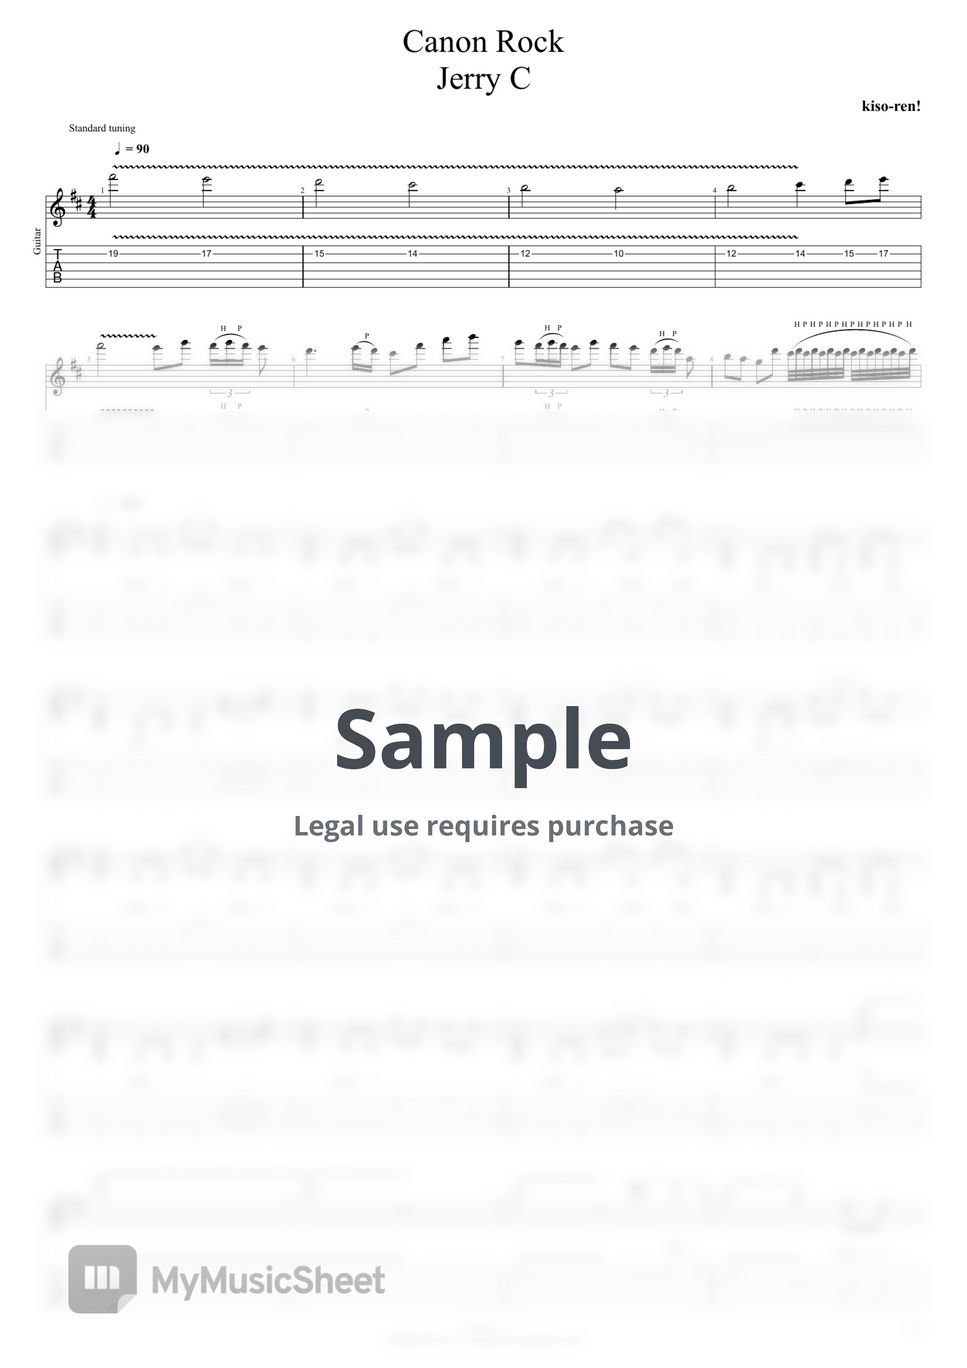 JerryC - Canon Rock Full Guitar Score TAB  JerryC (TAB PDF & Guitar Pro files.（GPX）) by Technical Guitar